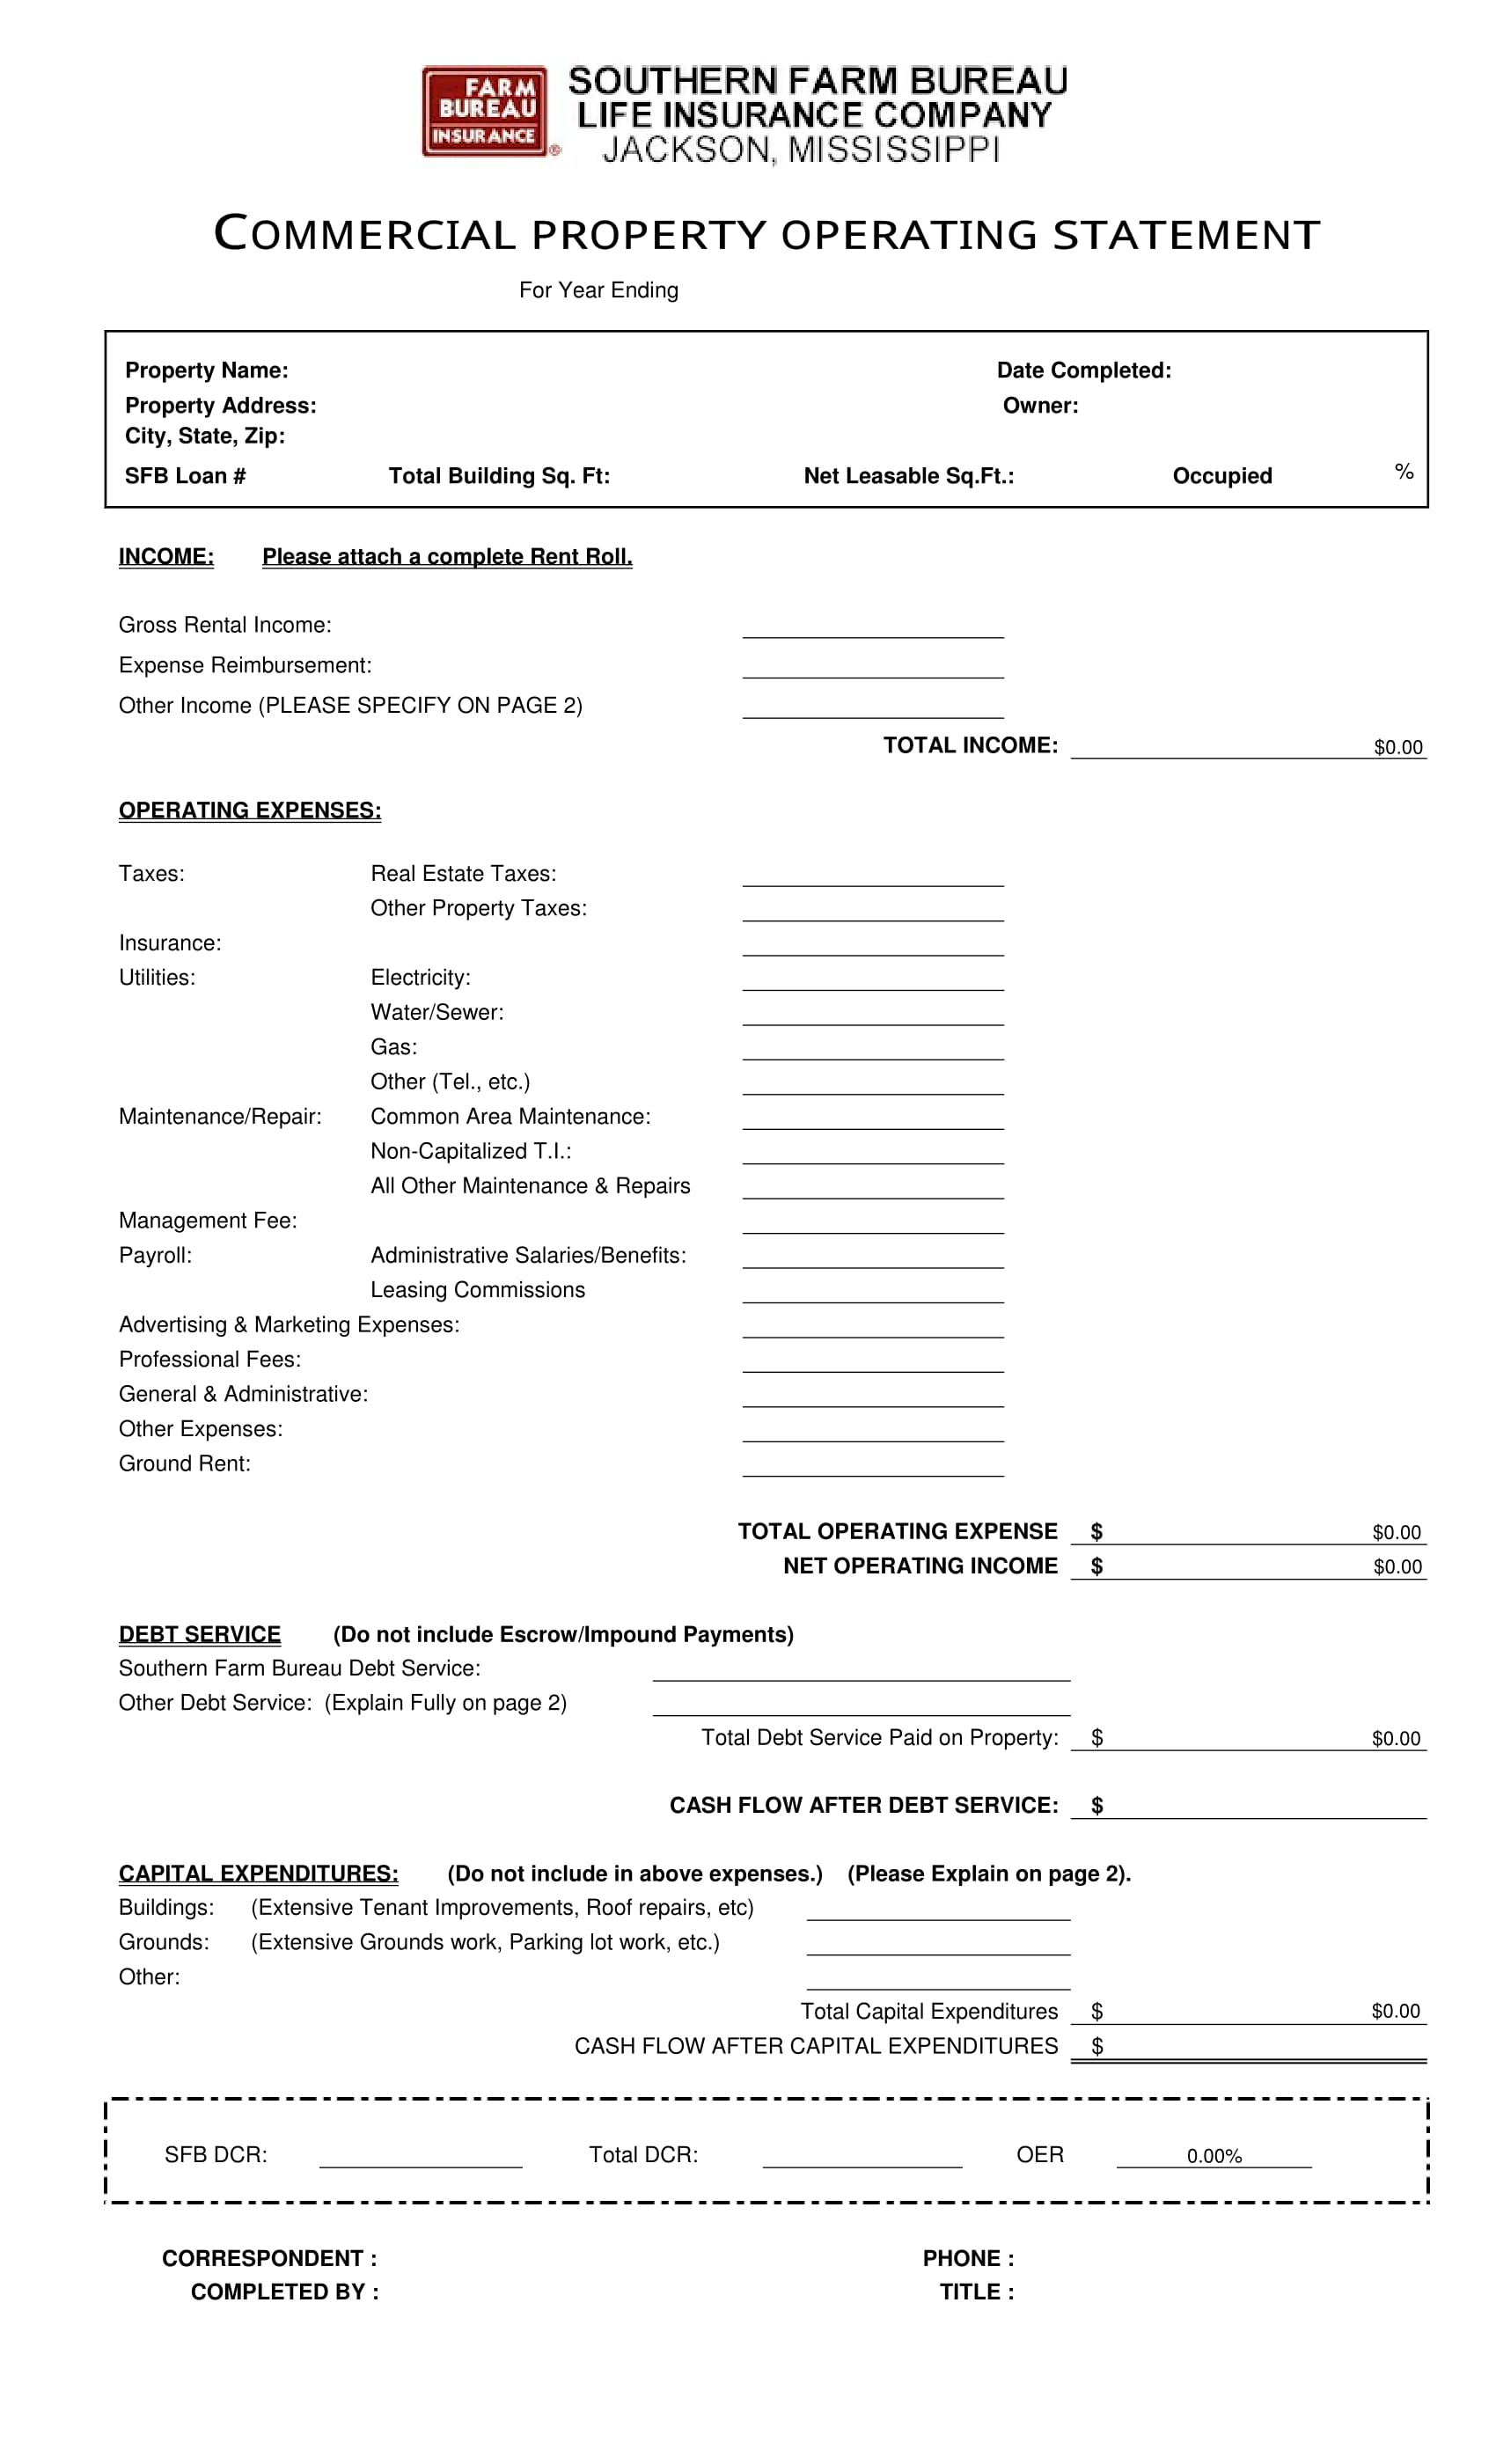 commercial property operating statement form 1